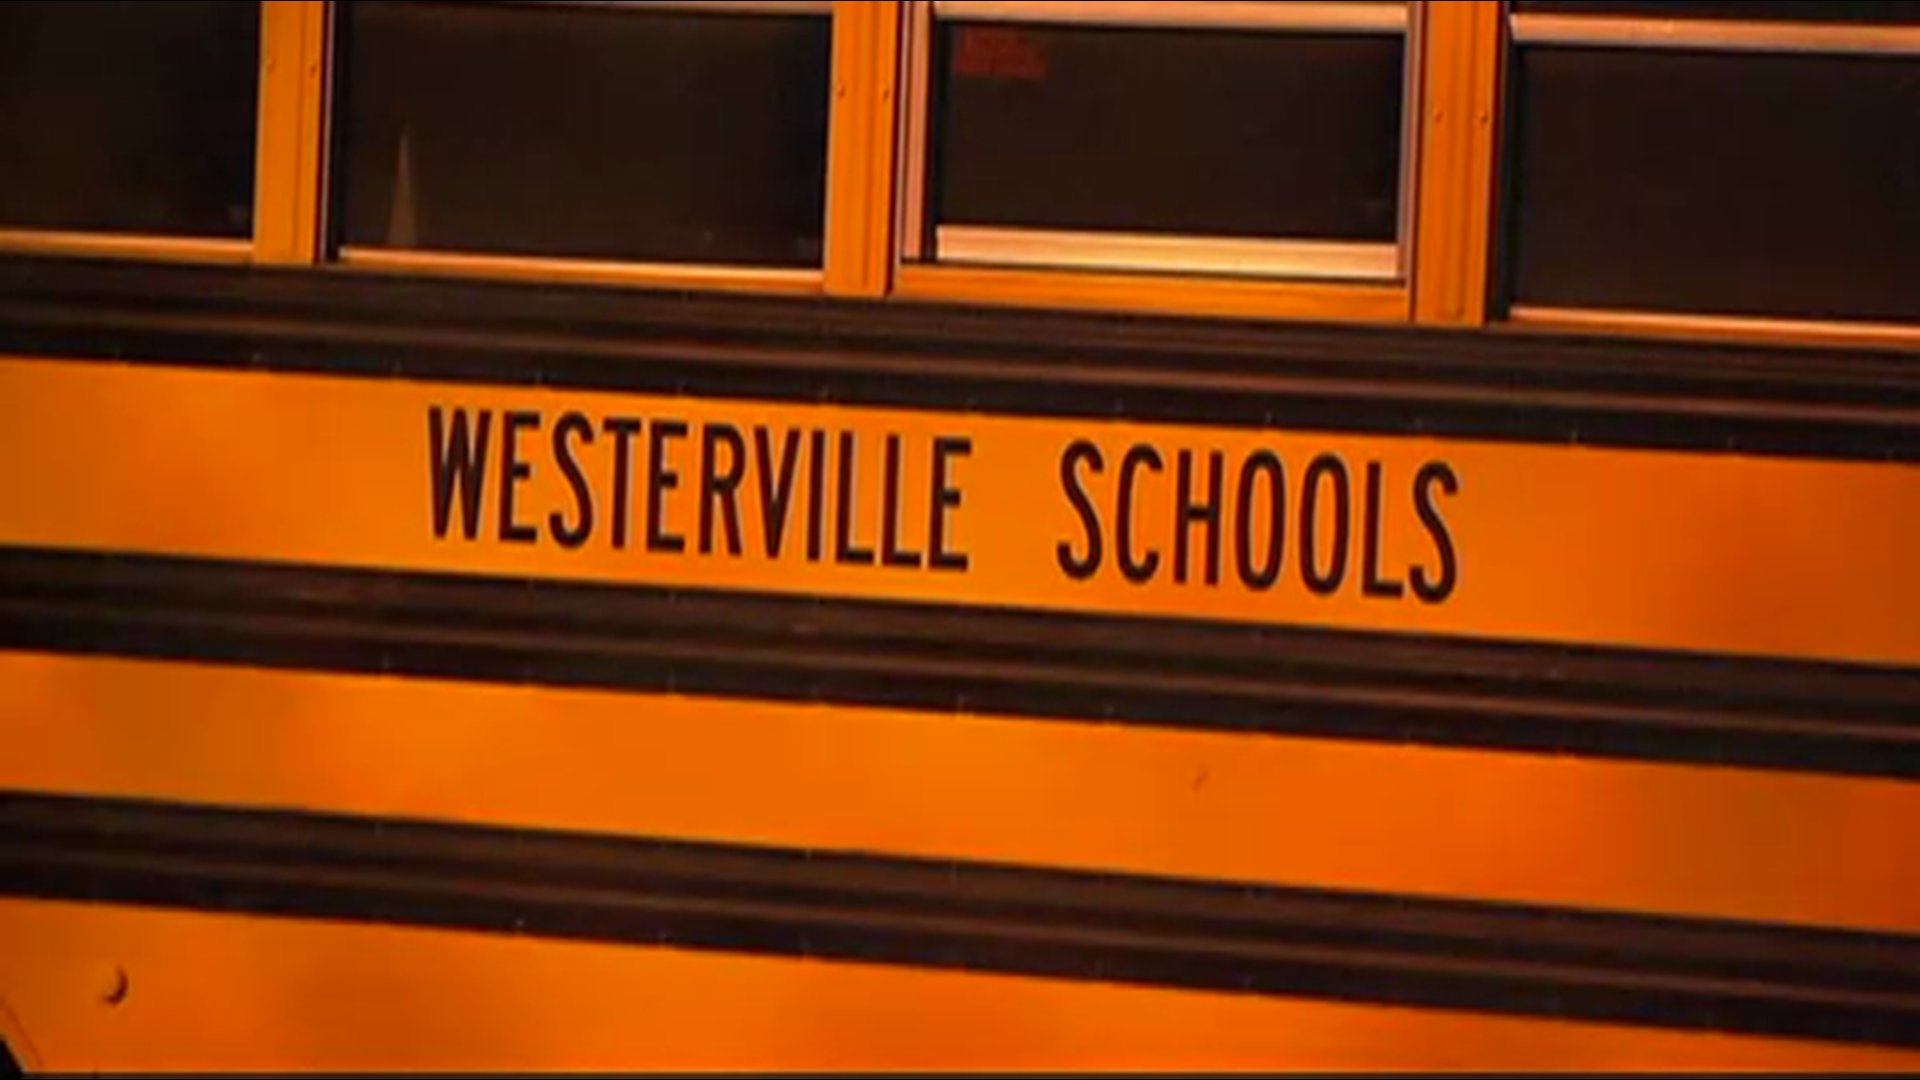 Westerville City Schools Superintendent John Kellogg announced the end of the district's mask mandate during a board meeting Monday night.